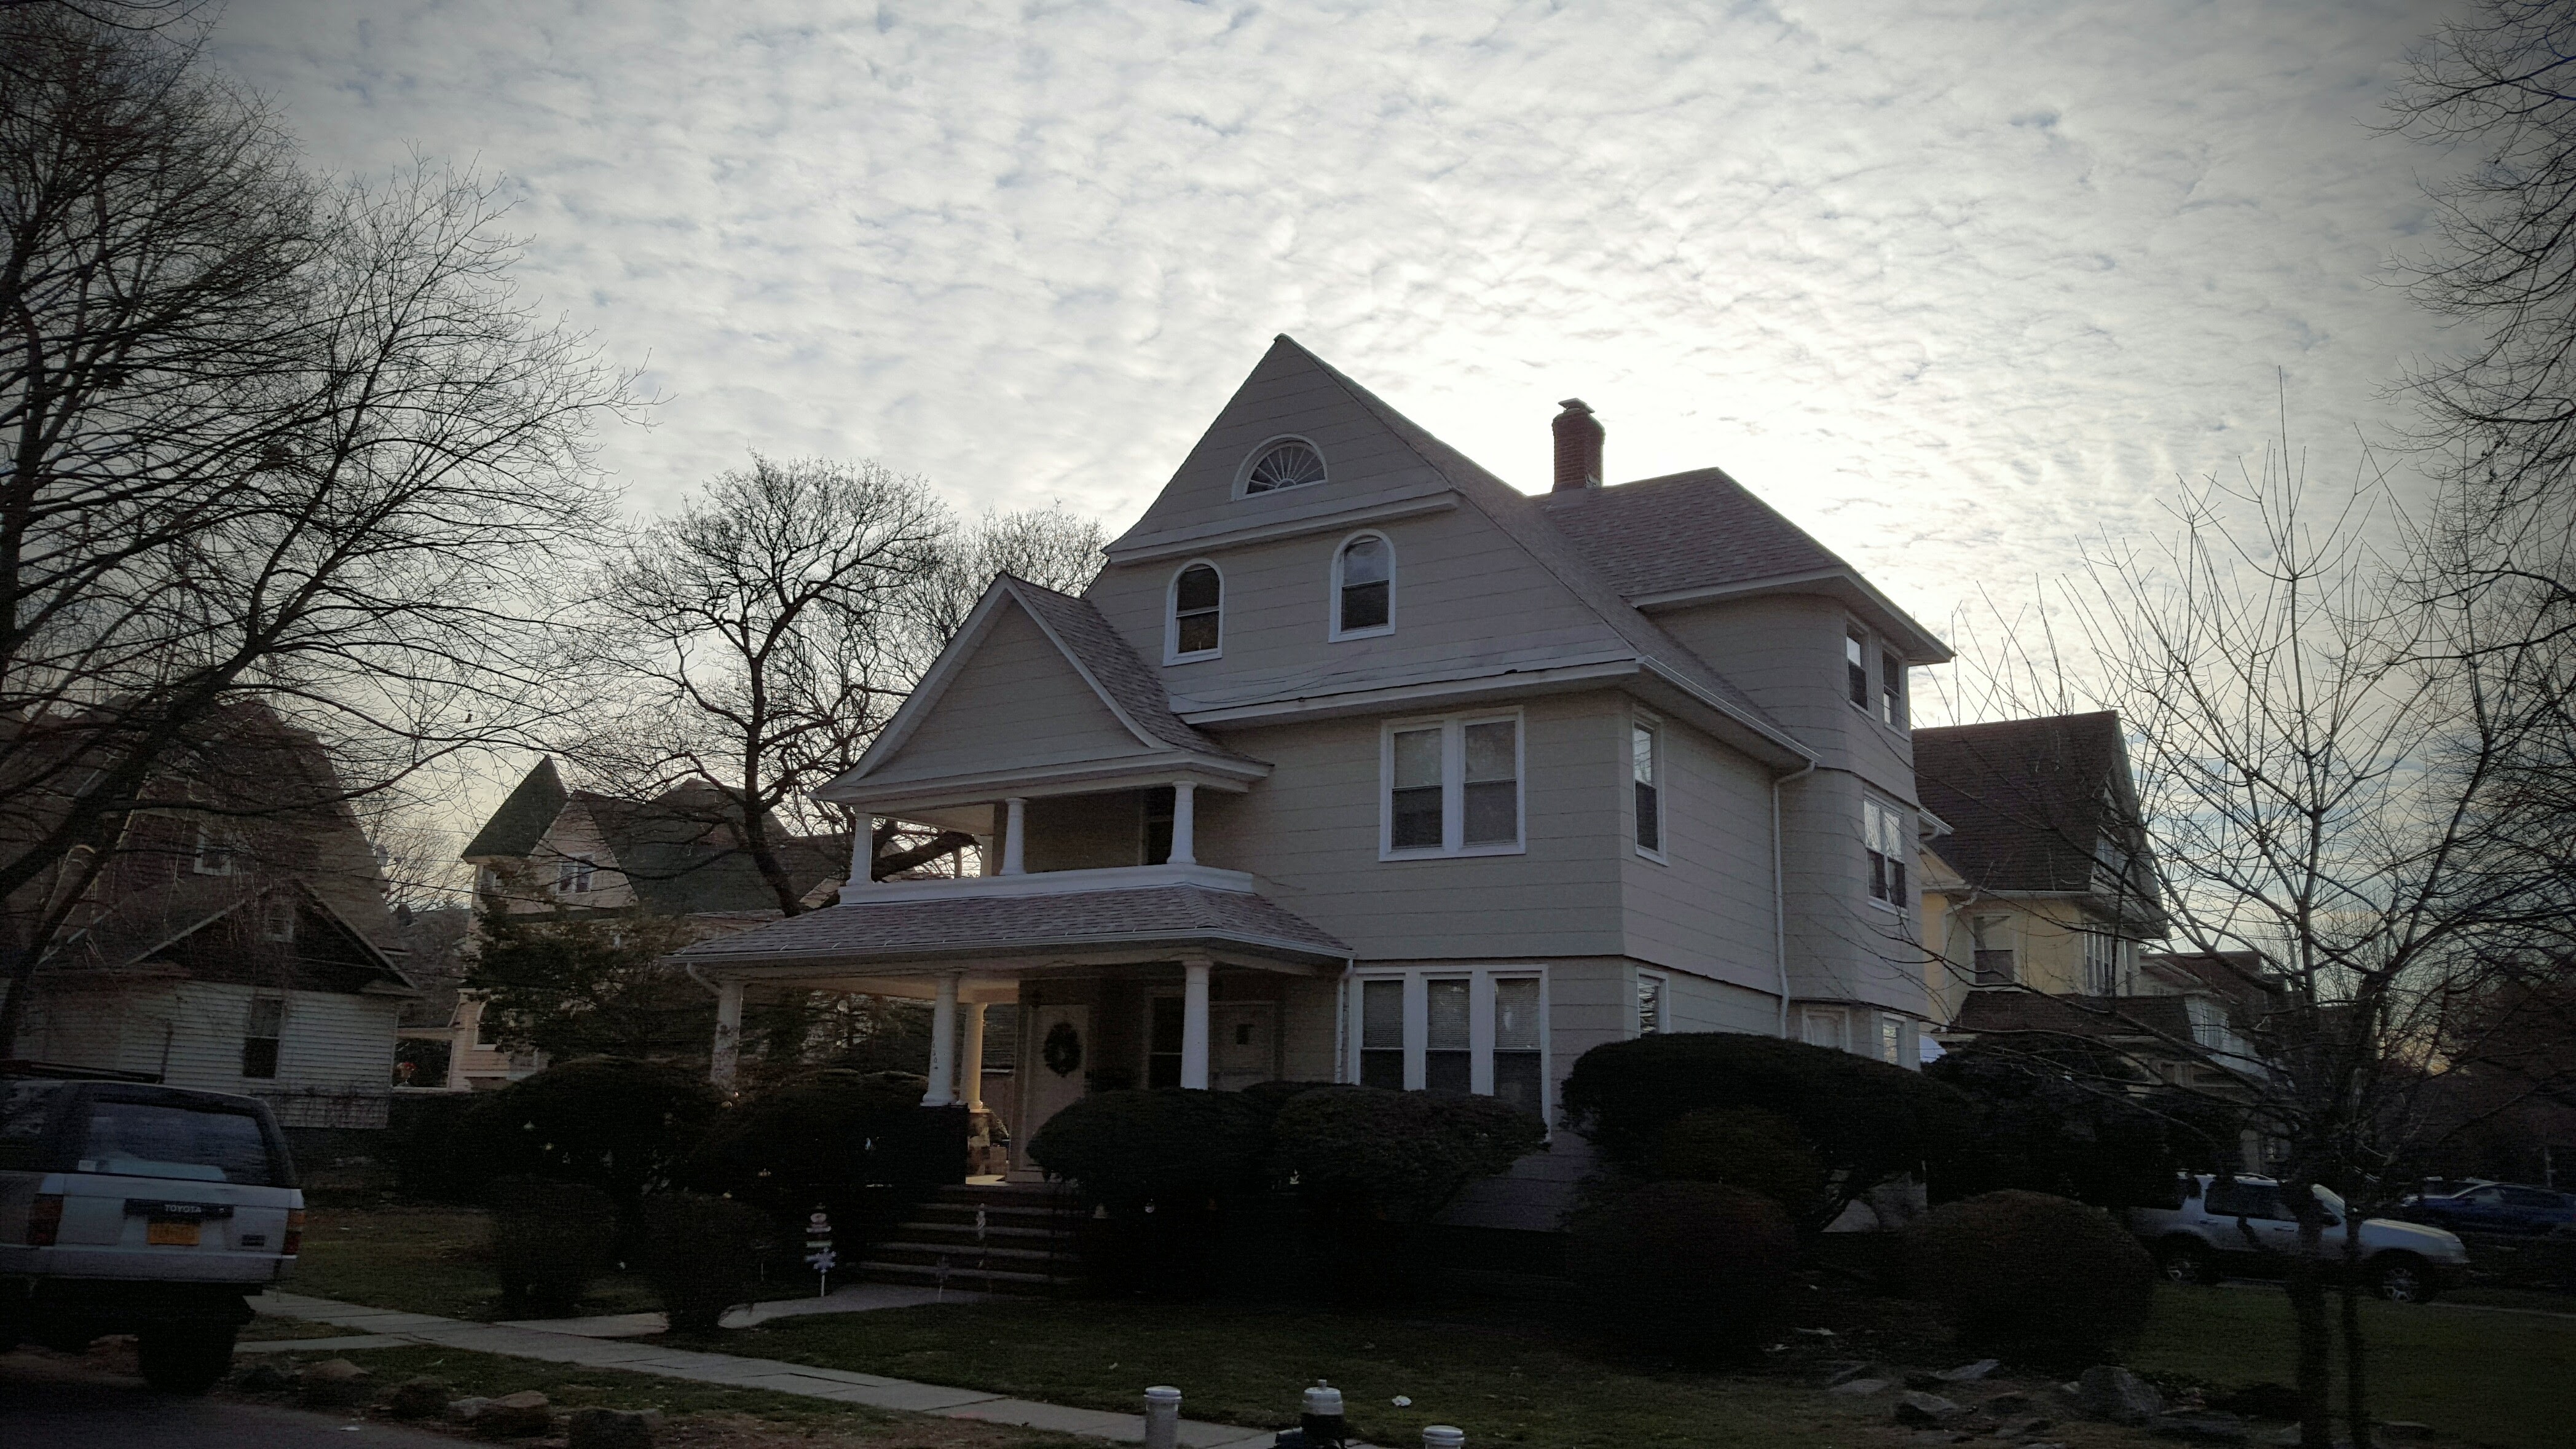 Richmond Hill, Queens Historic Districts Council's Six